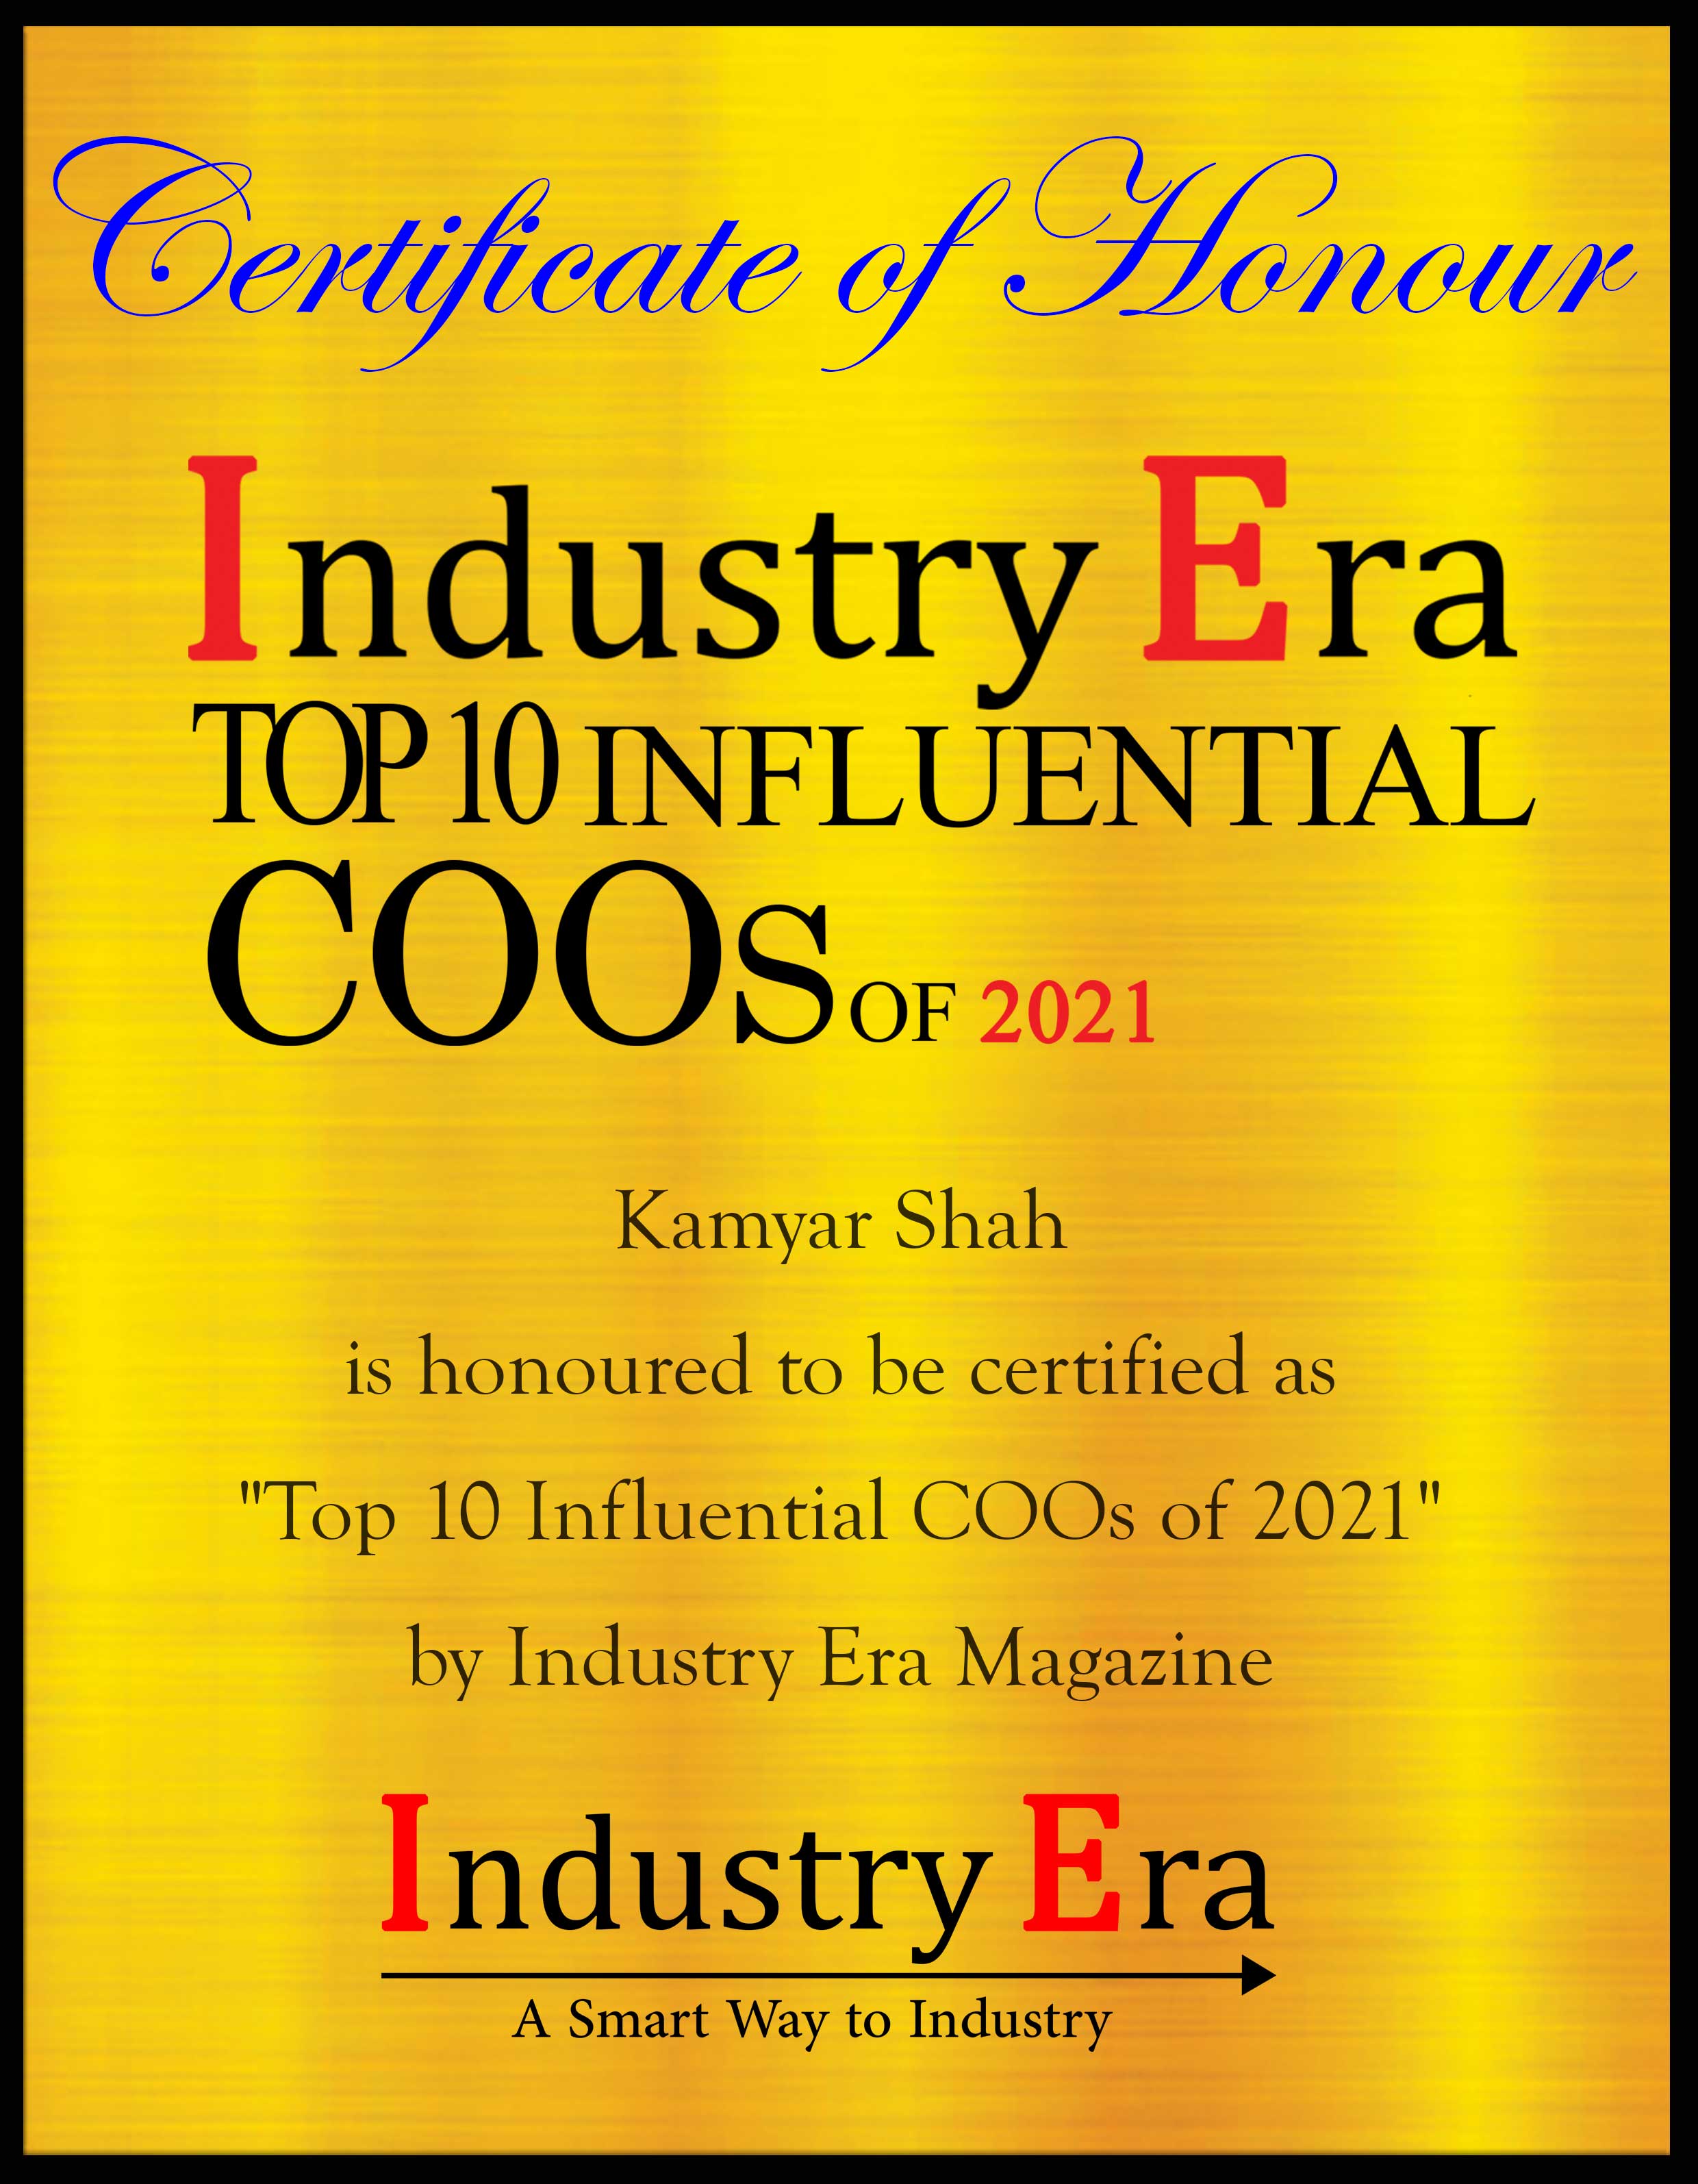 Kamyar Chief Officer, Top 10 Influential COOs of 2021 | Industry Era